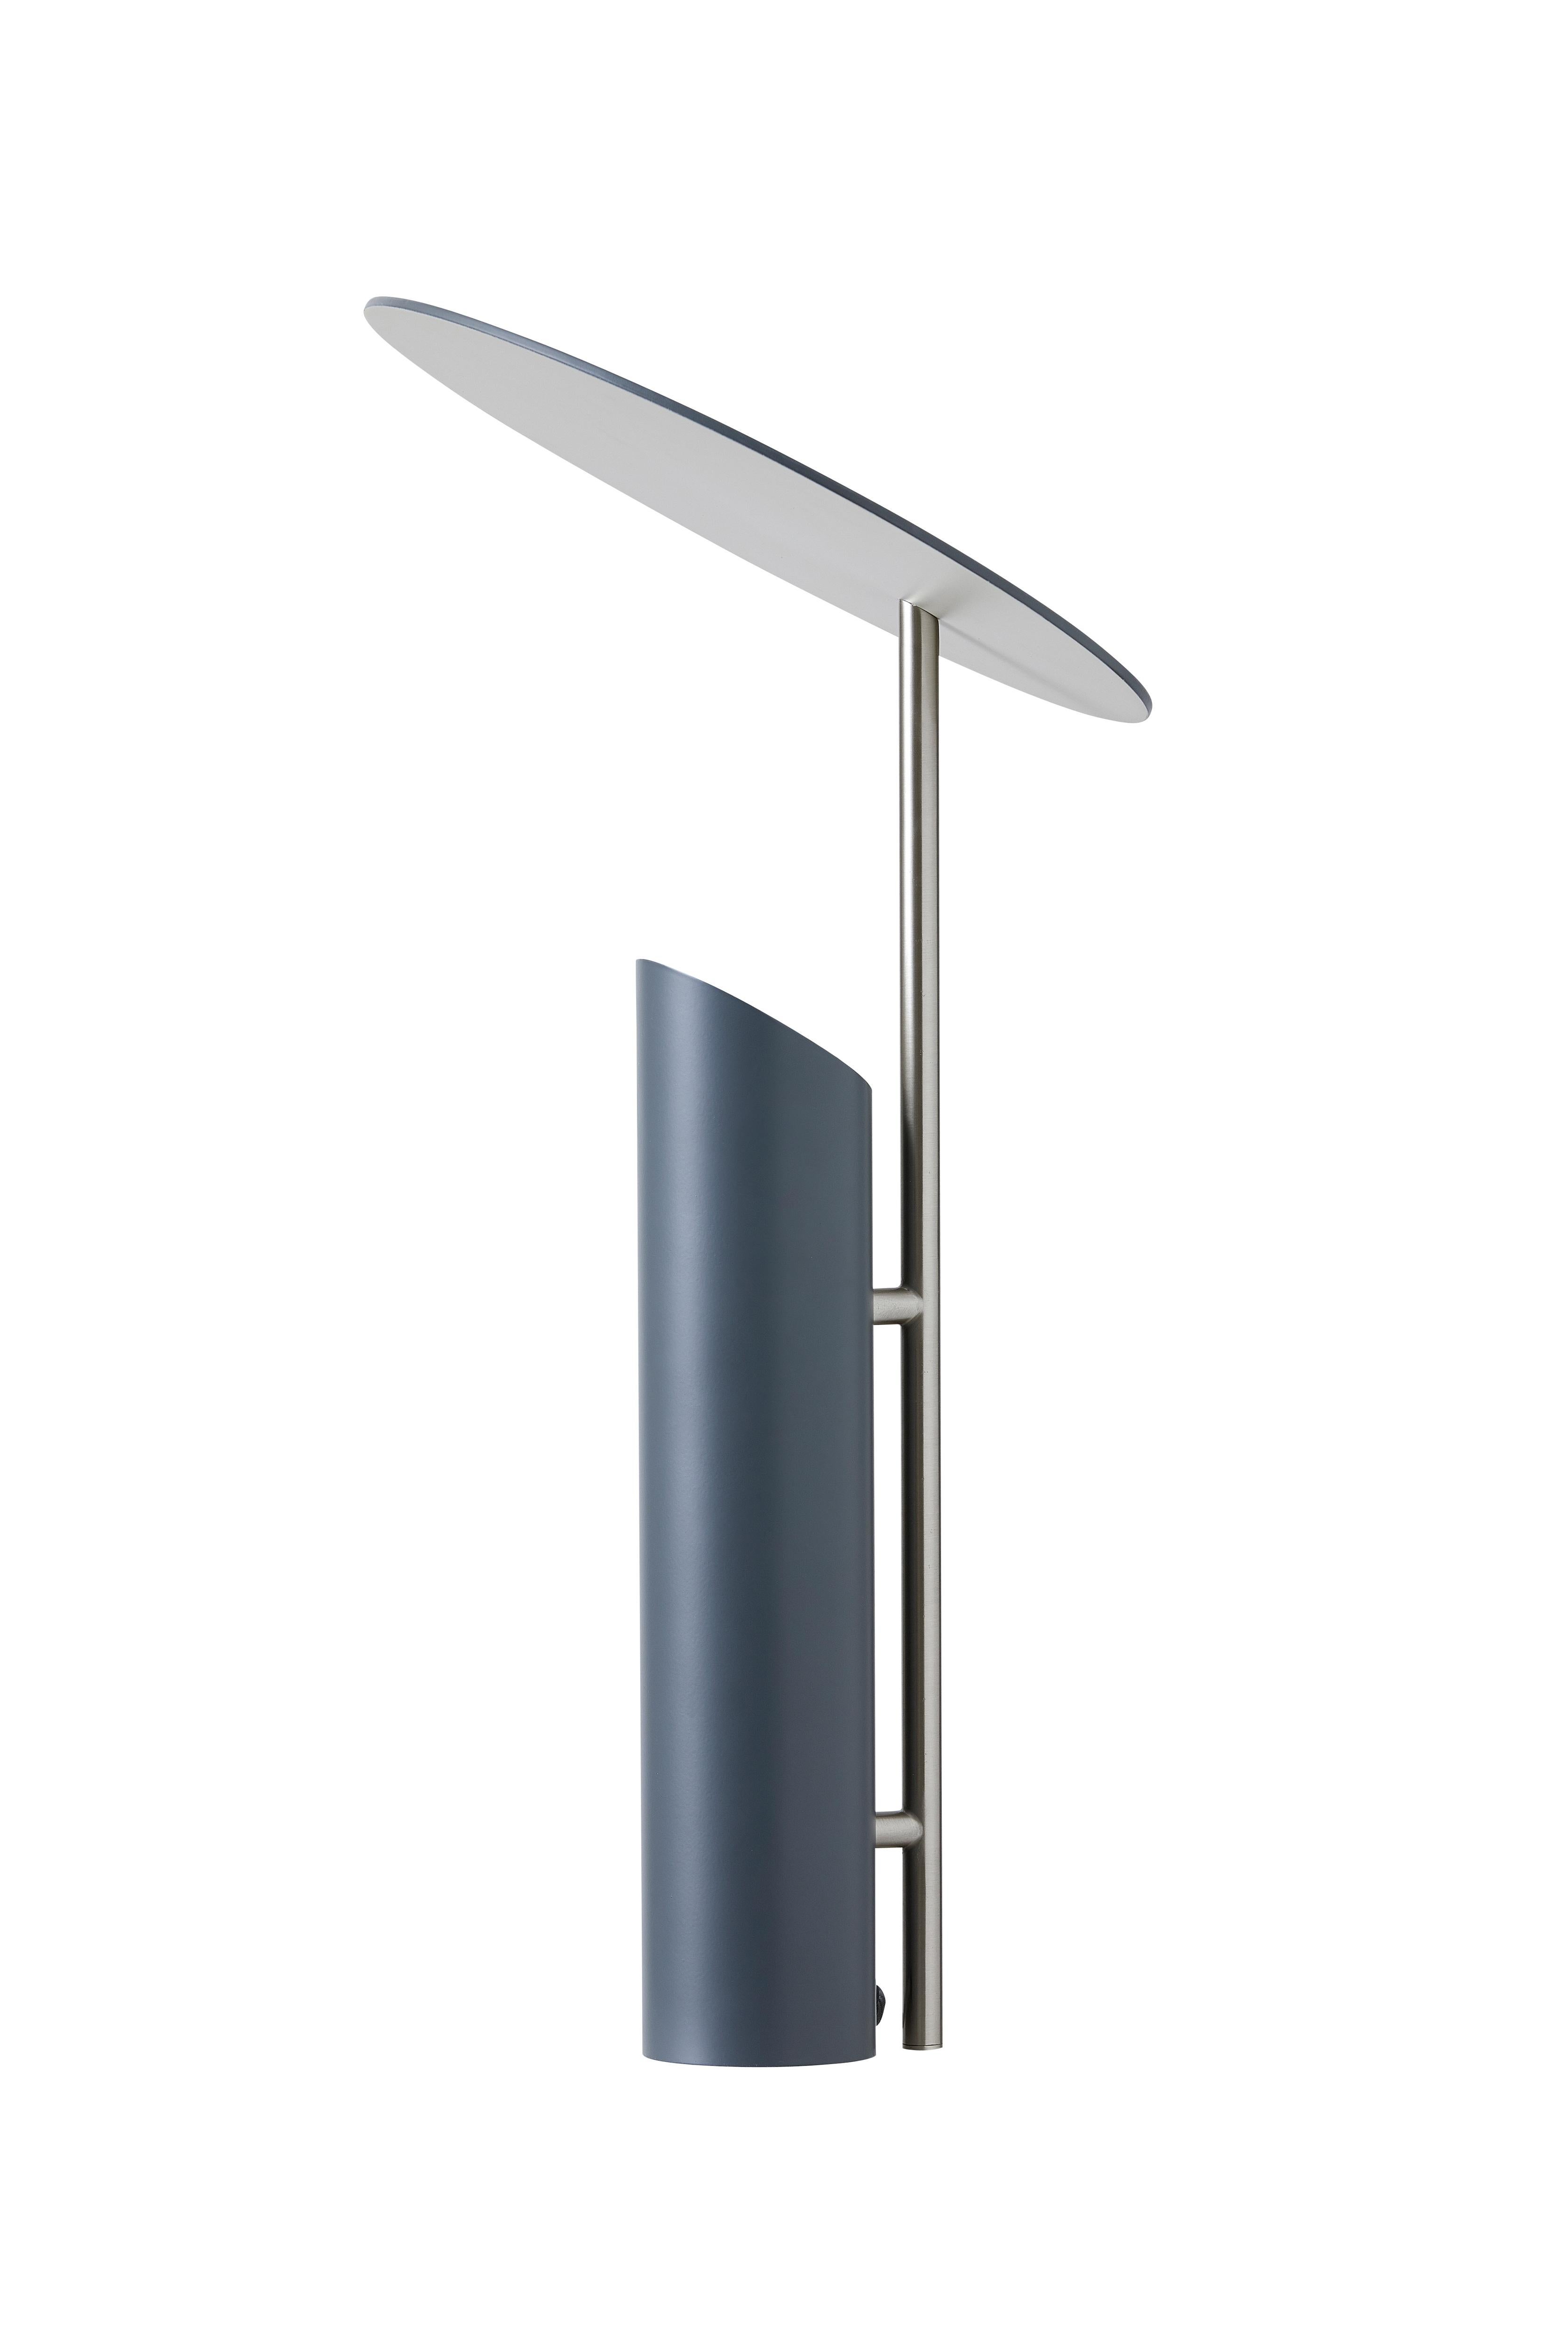 Table lamp with slanted disc shade which reflects the light coming from the base of the lamp (Light source facing upwards).

Material: 
All parts manufactured in steel
Powder coated grey
Gray variant; vertical rod in satin finish 
The down